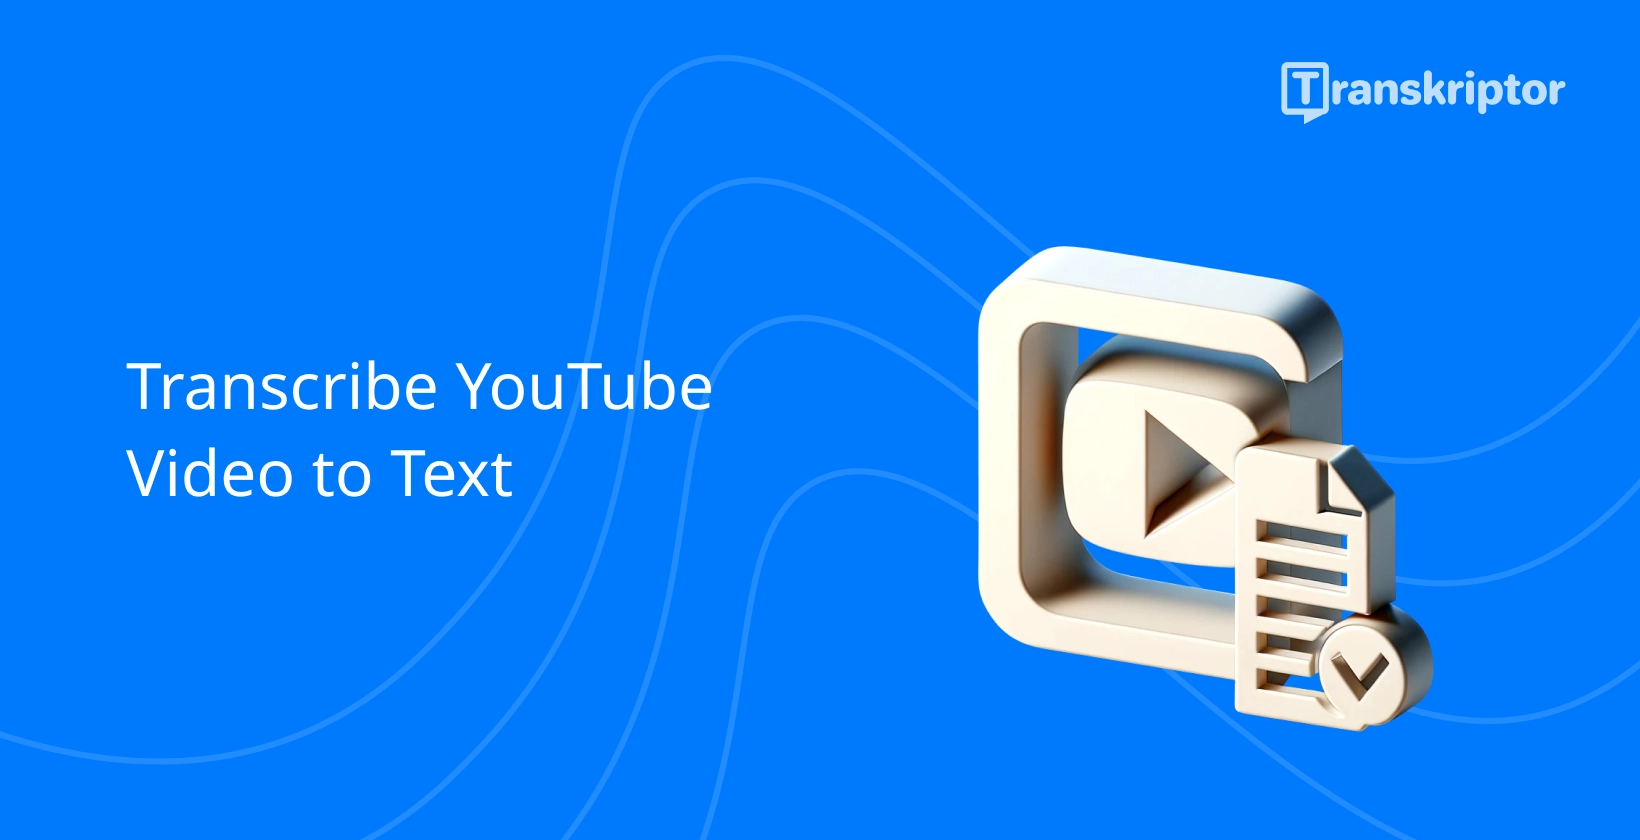 Transcription services icon with play button and document symbolizing YouTube video conversion to text.